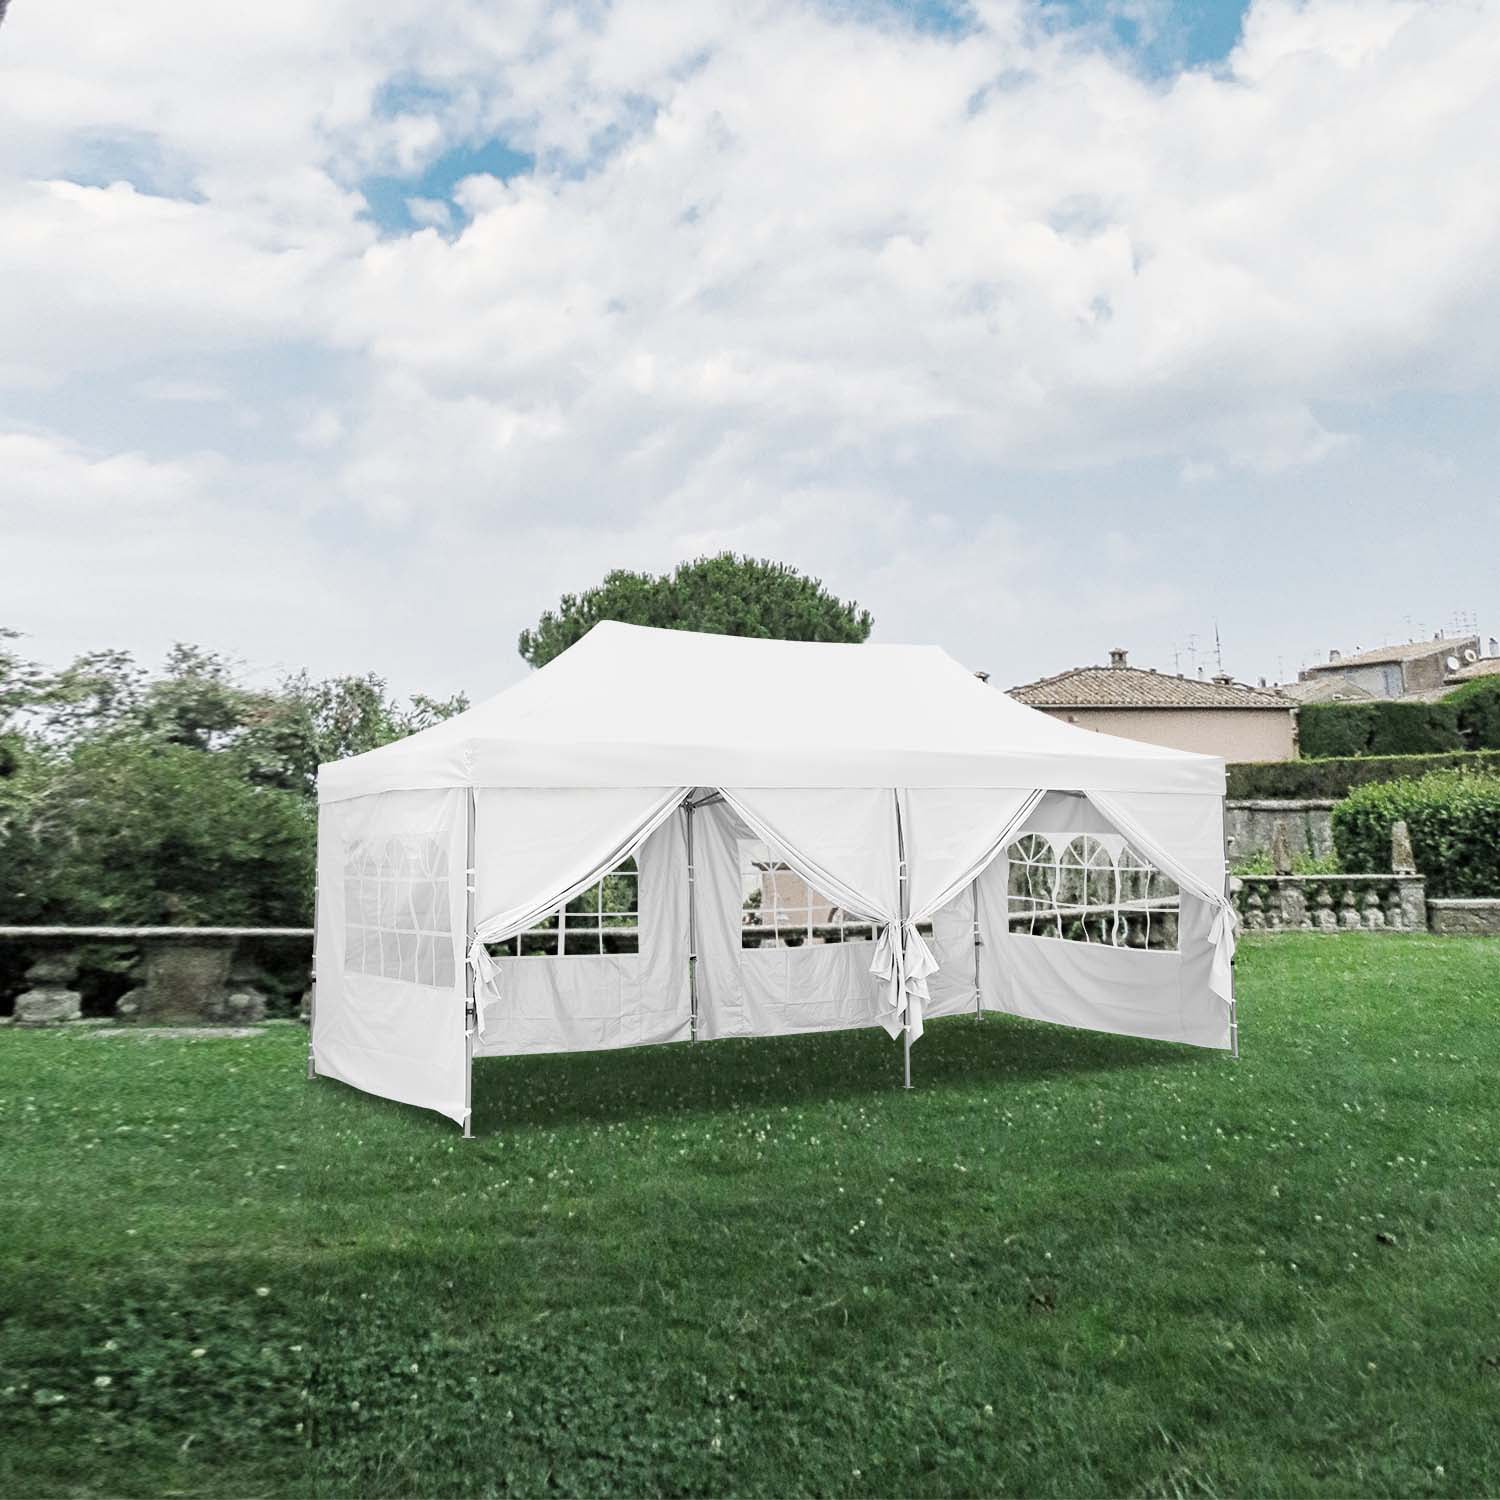 13’x26’ Gazebo Party Tent Patio Canopy Shelter with 4 Sidewalls White 